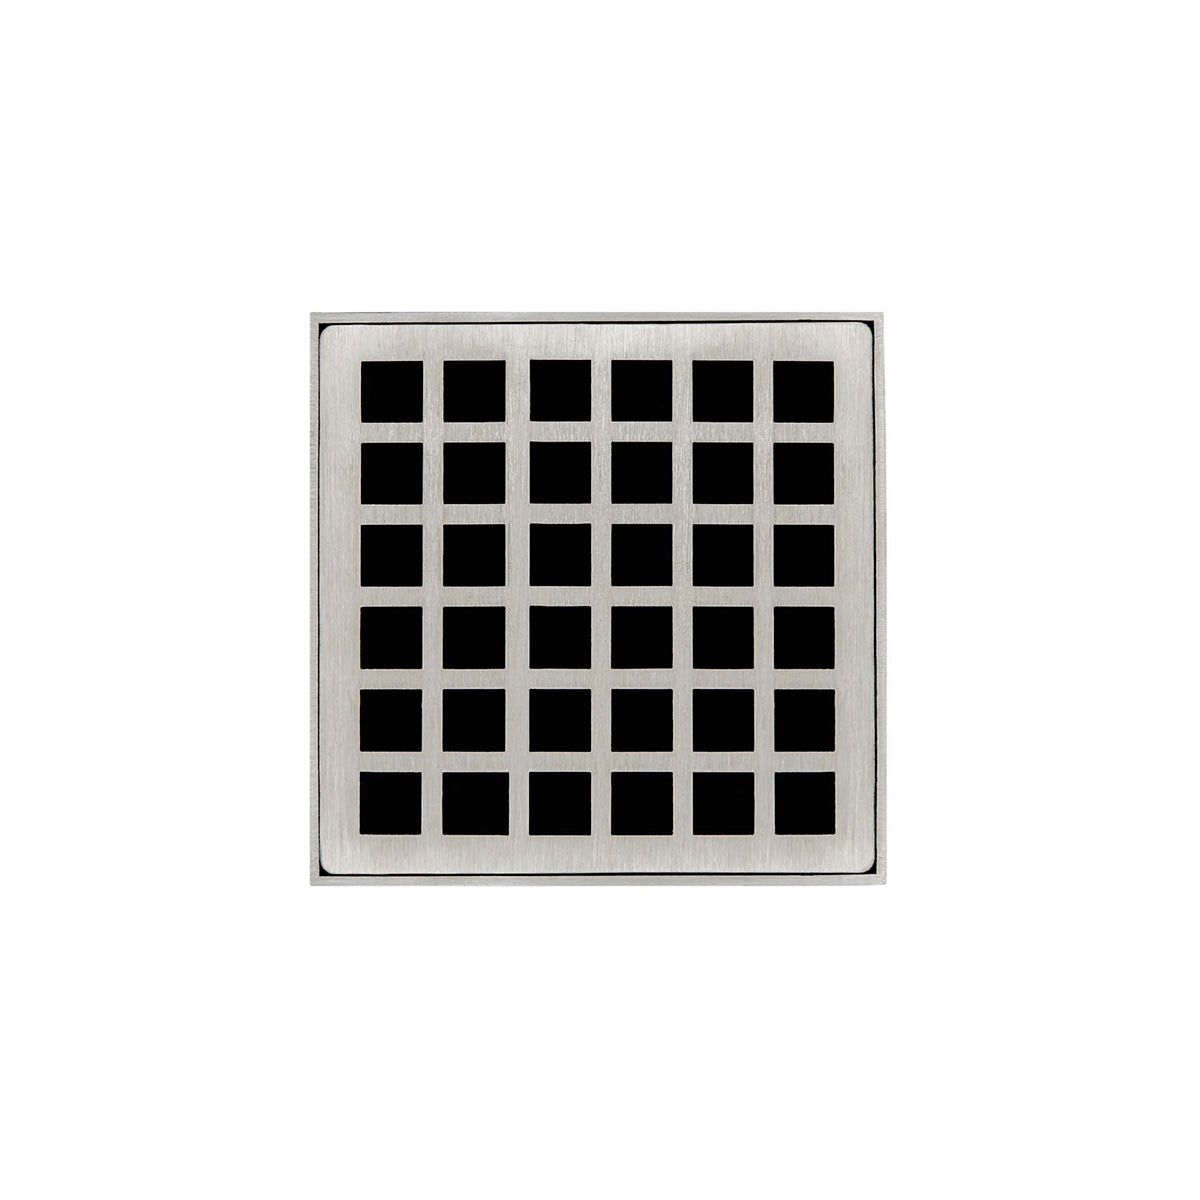 Infinity Drain 4" x 4" QDB 4 Premium Center Drain Kit with Squares Pattern Decorative Plate with Stainless Steel Bonded Flange Drain Body, 2" No Hub Outlet